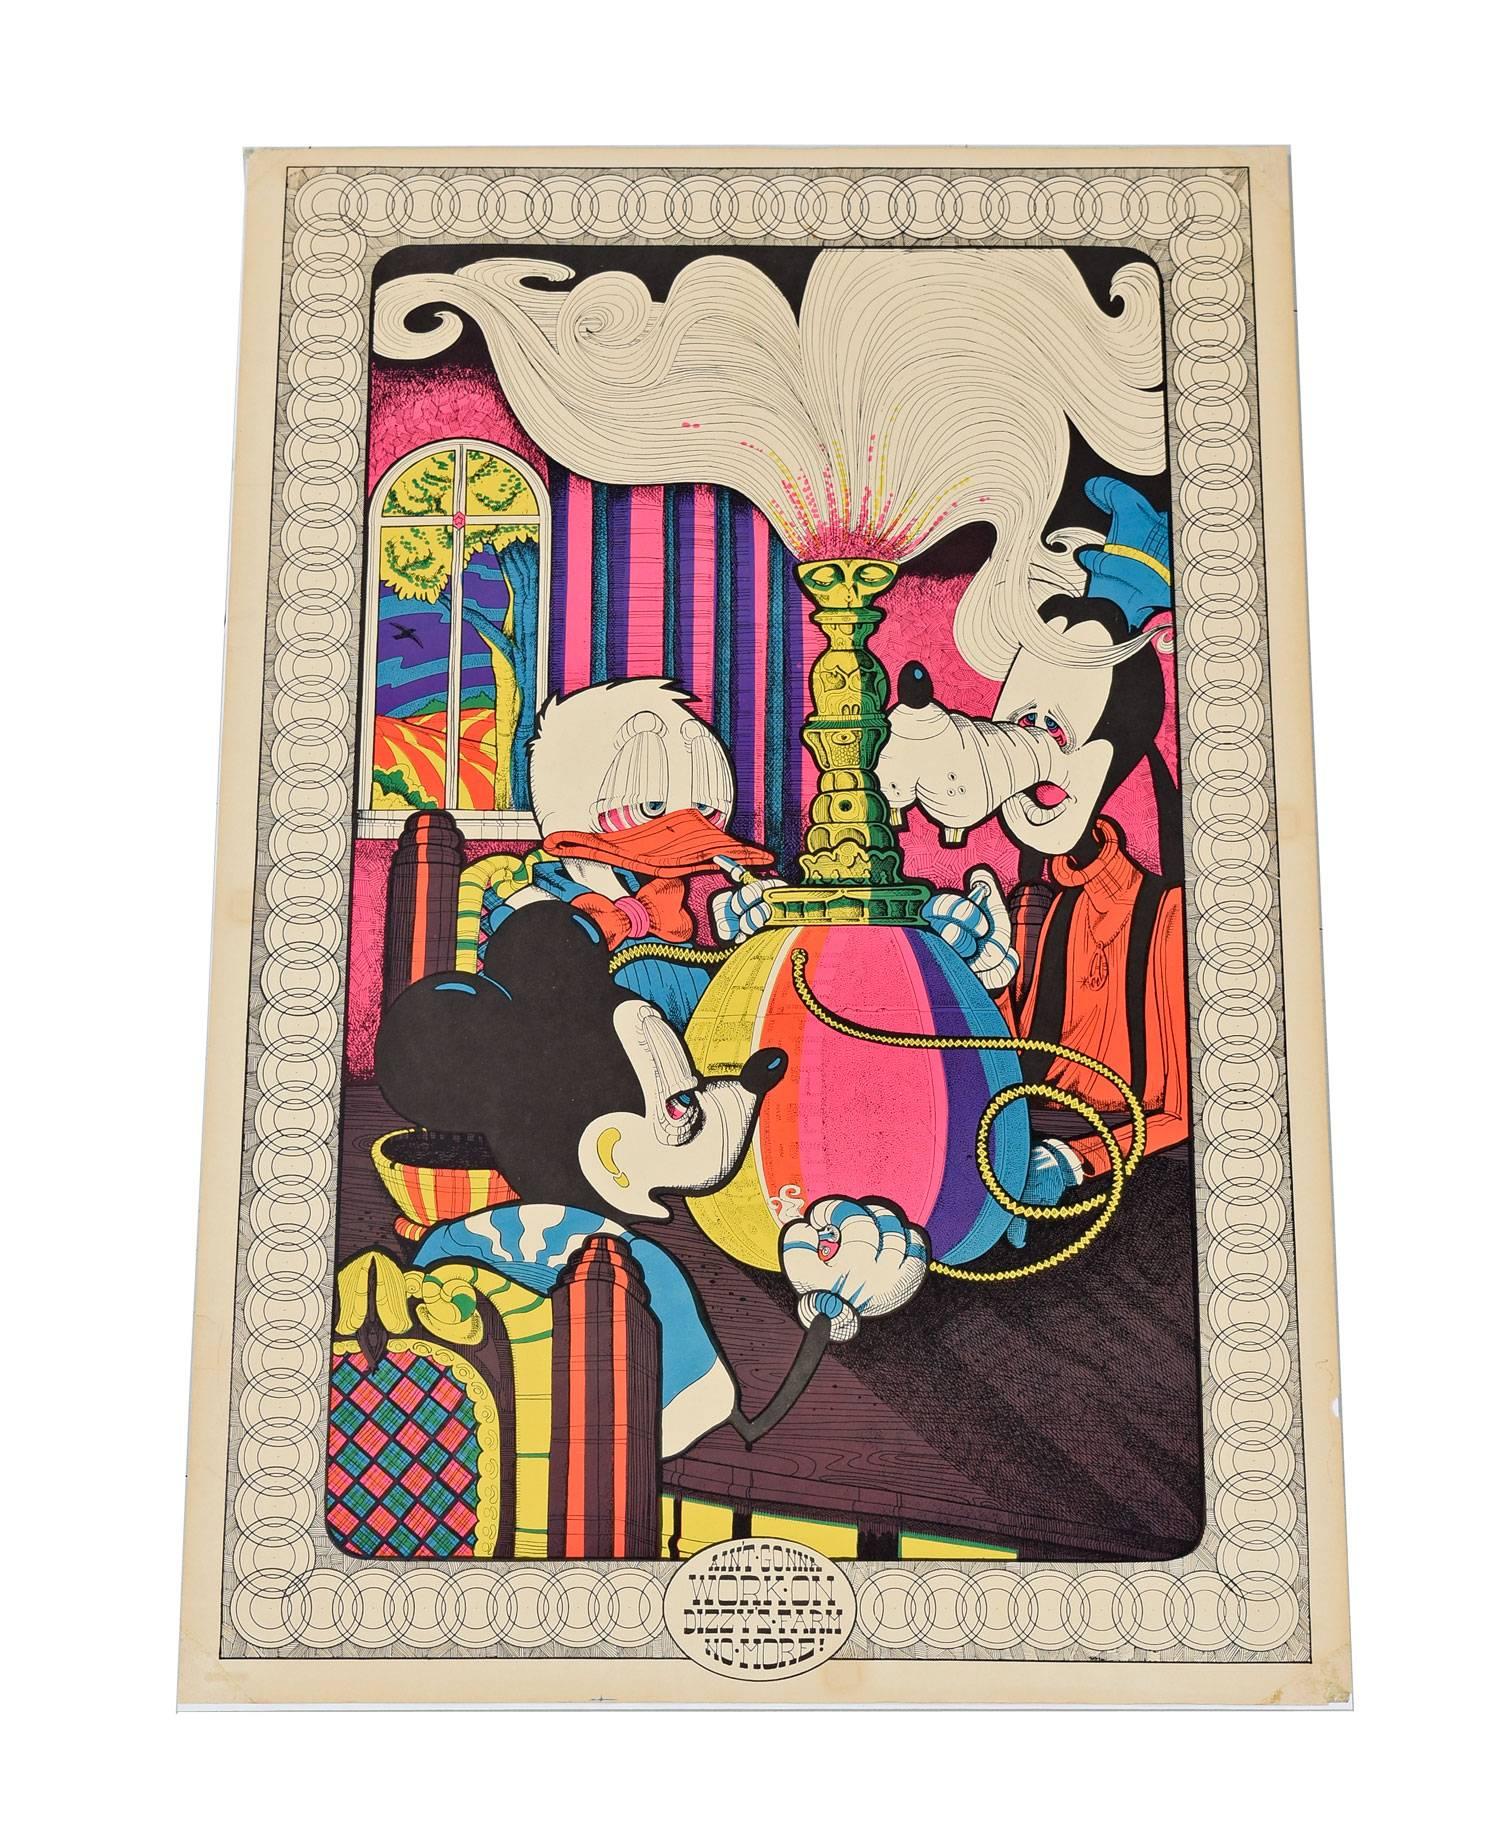 A framed poster under glass in neon colors featuring Micky, Goofy and Donald Duck (Disney characters) sitting around a table and smoking from a large hookah. Their eyes are drooping and red suggesting the hookah is filled with a narcotic infused